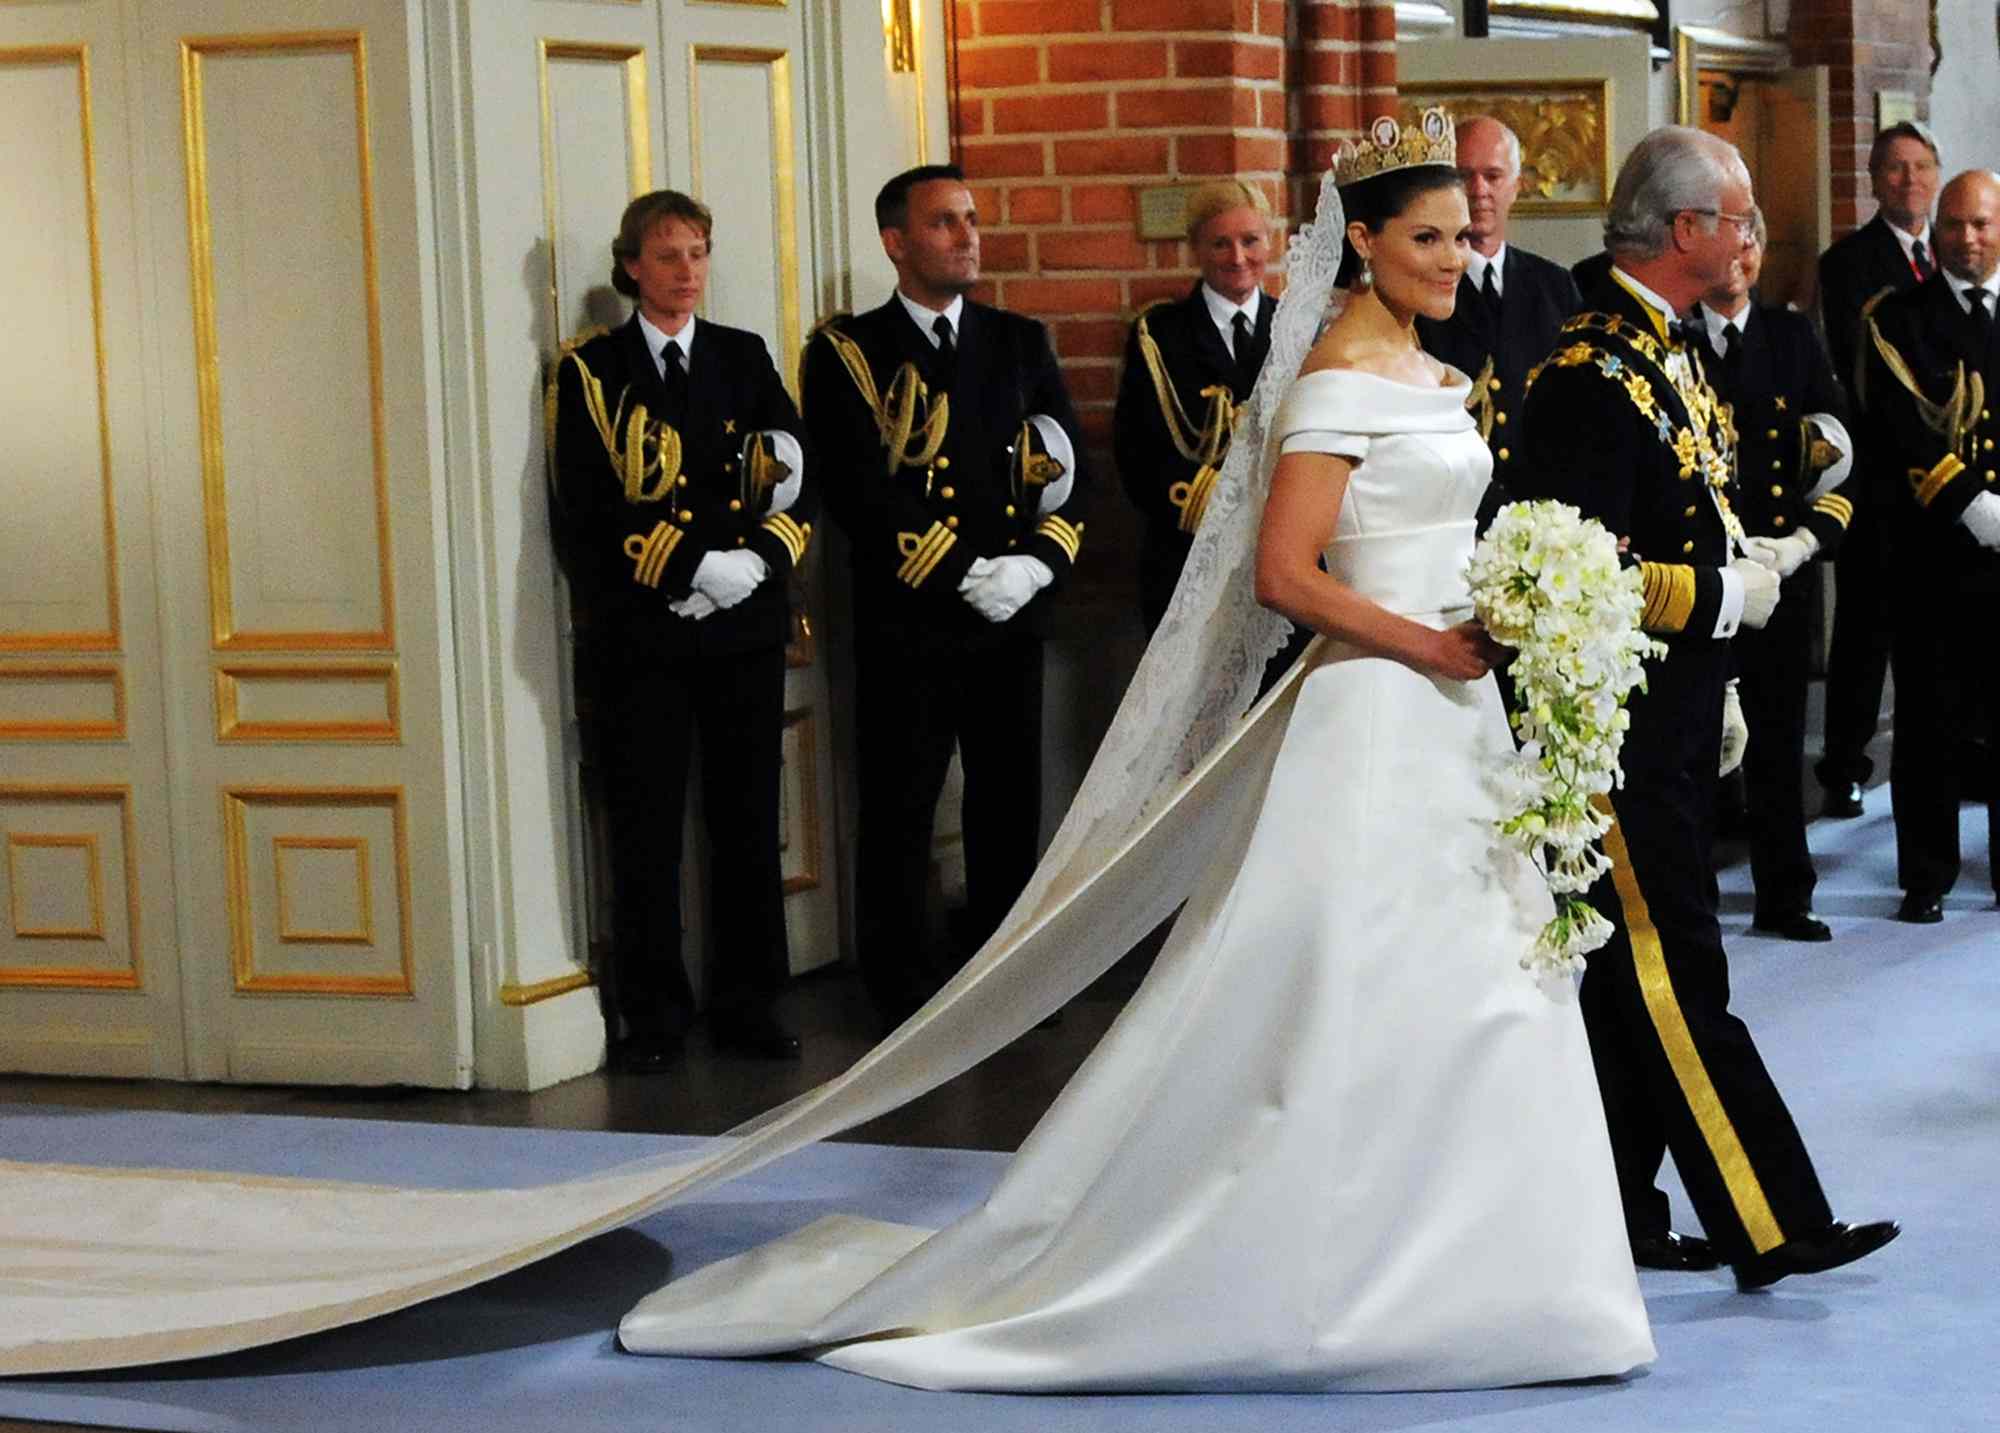 Crown Princess Victoria of Sweden is led into the church by her father the king Carl Gustaf of Sweden